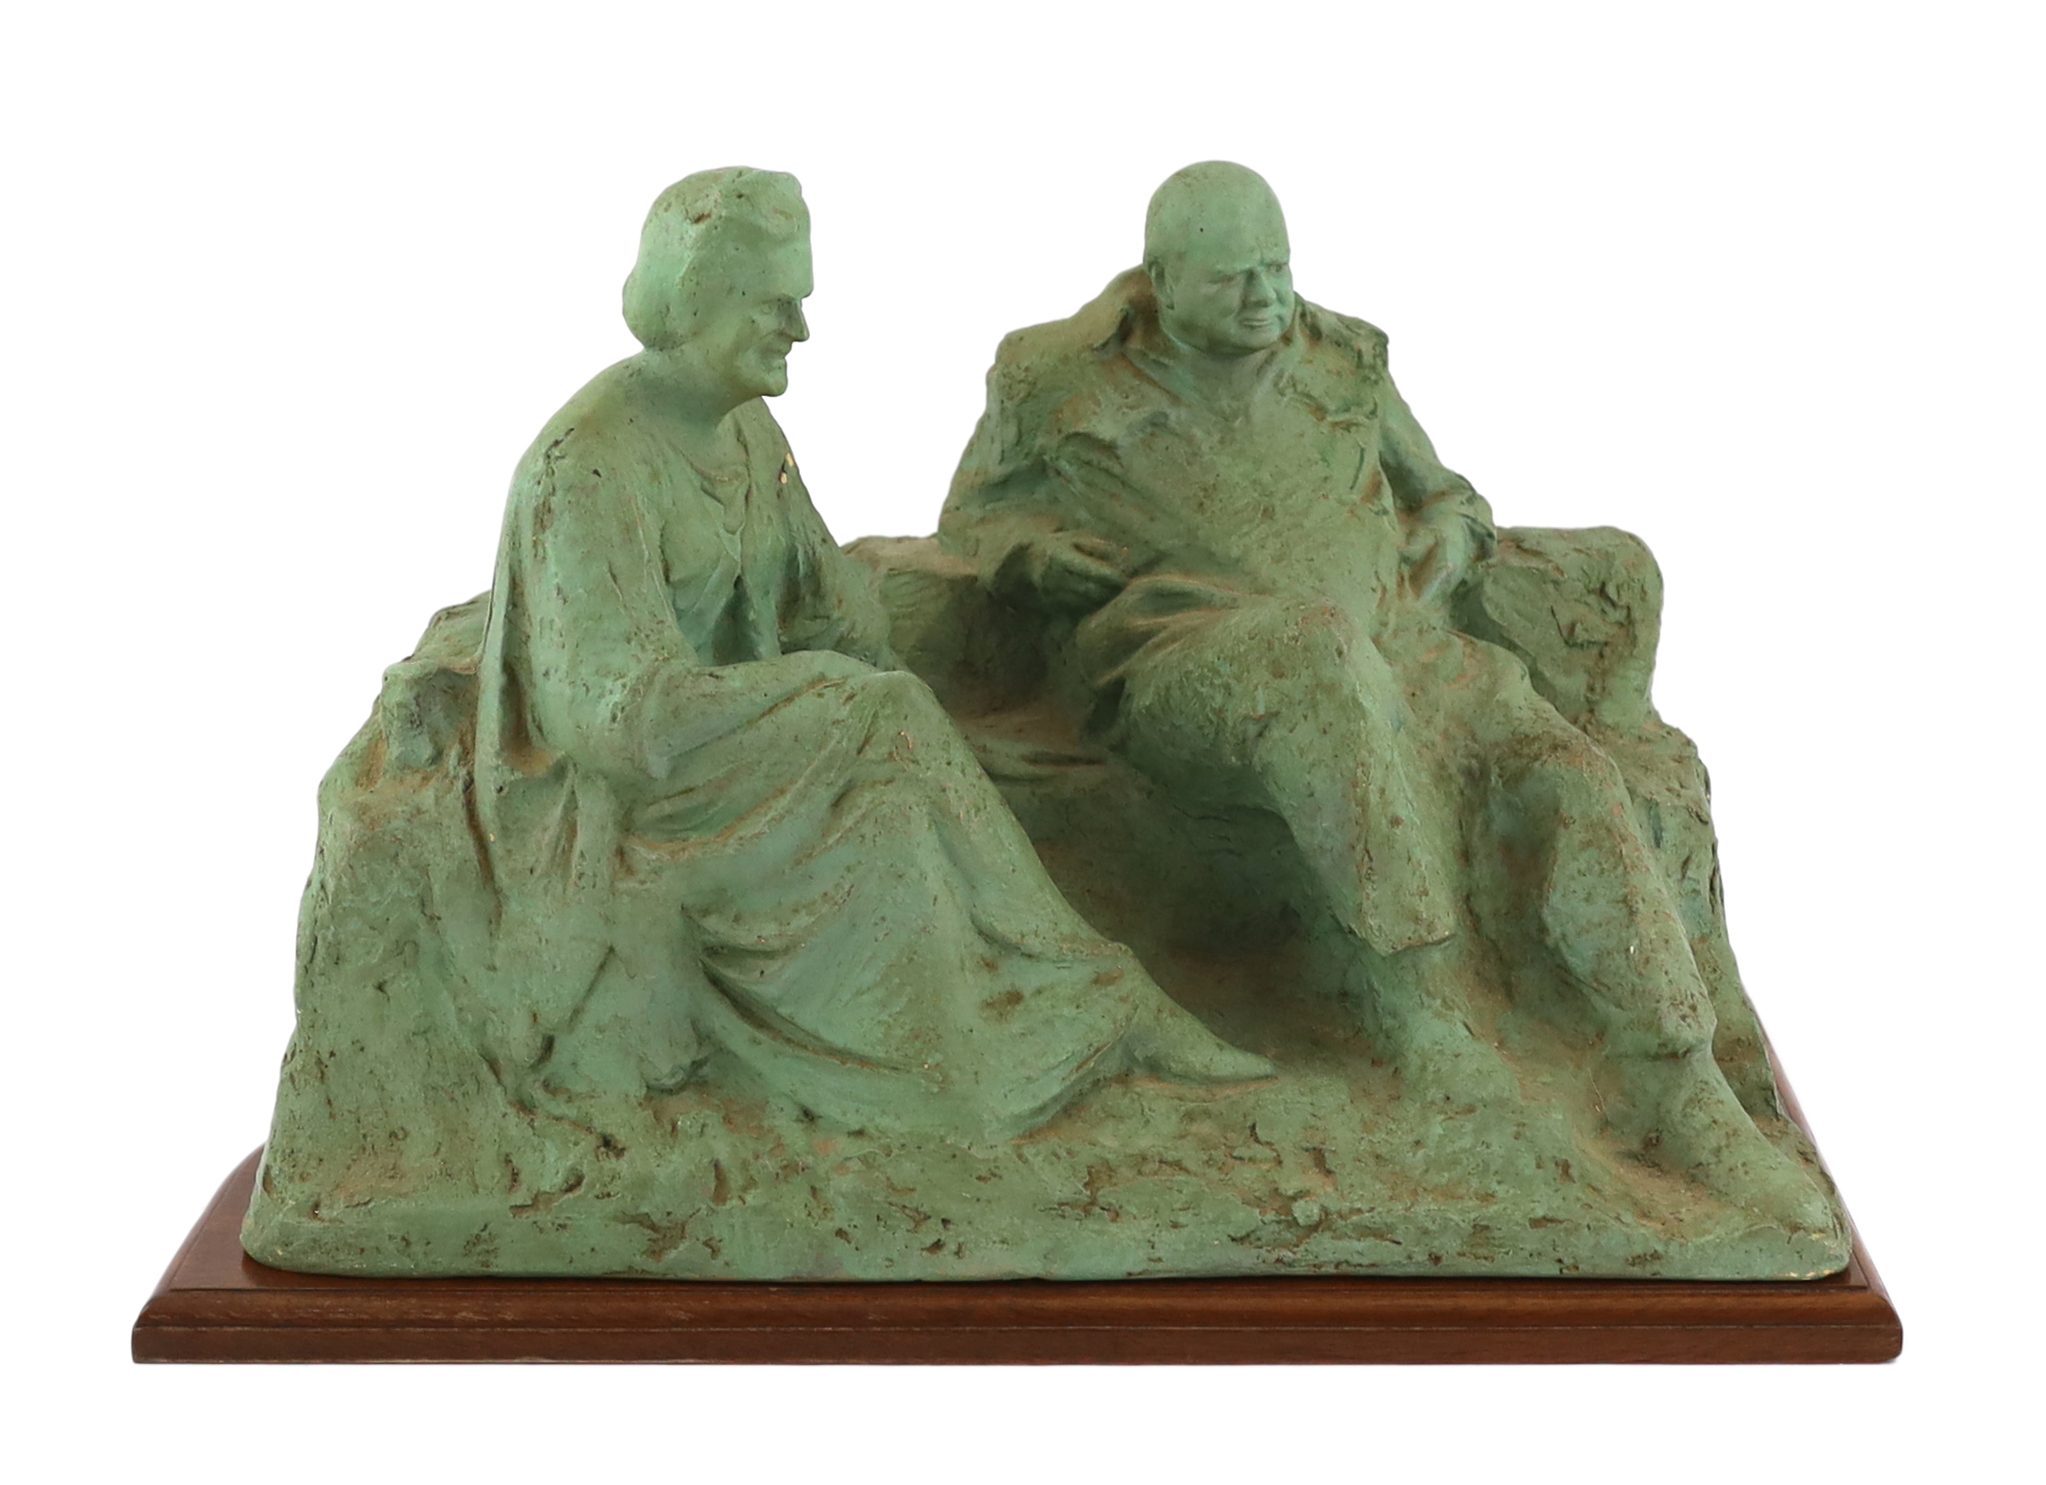 Oscar Nemon (1906-1985) - A maquette for - “Married Love’’, depicting Sir Winston Churchill and Clementine Churchill, plaster with a verdigris patination